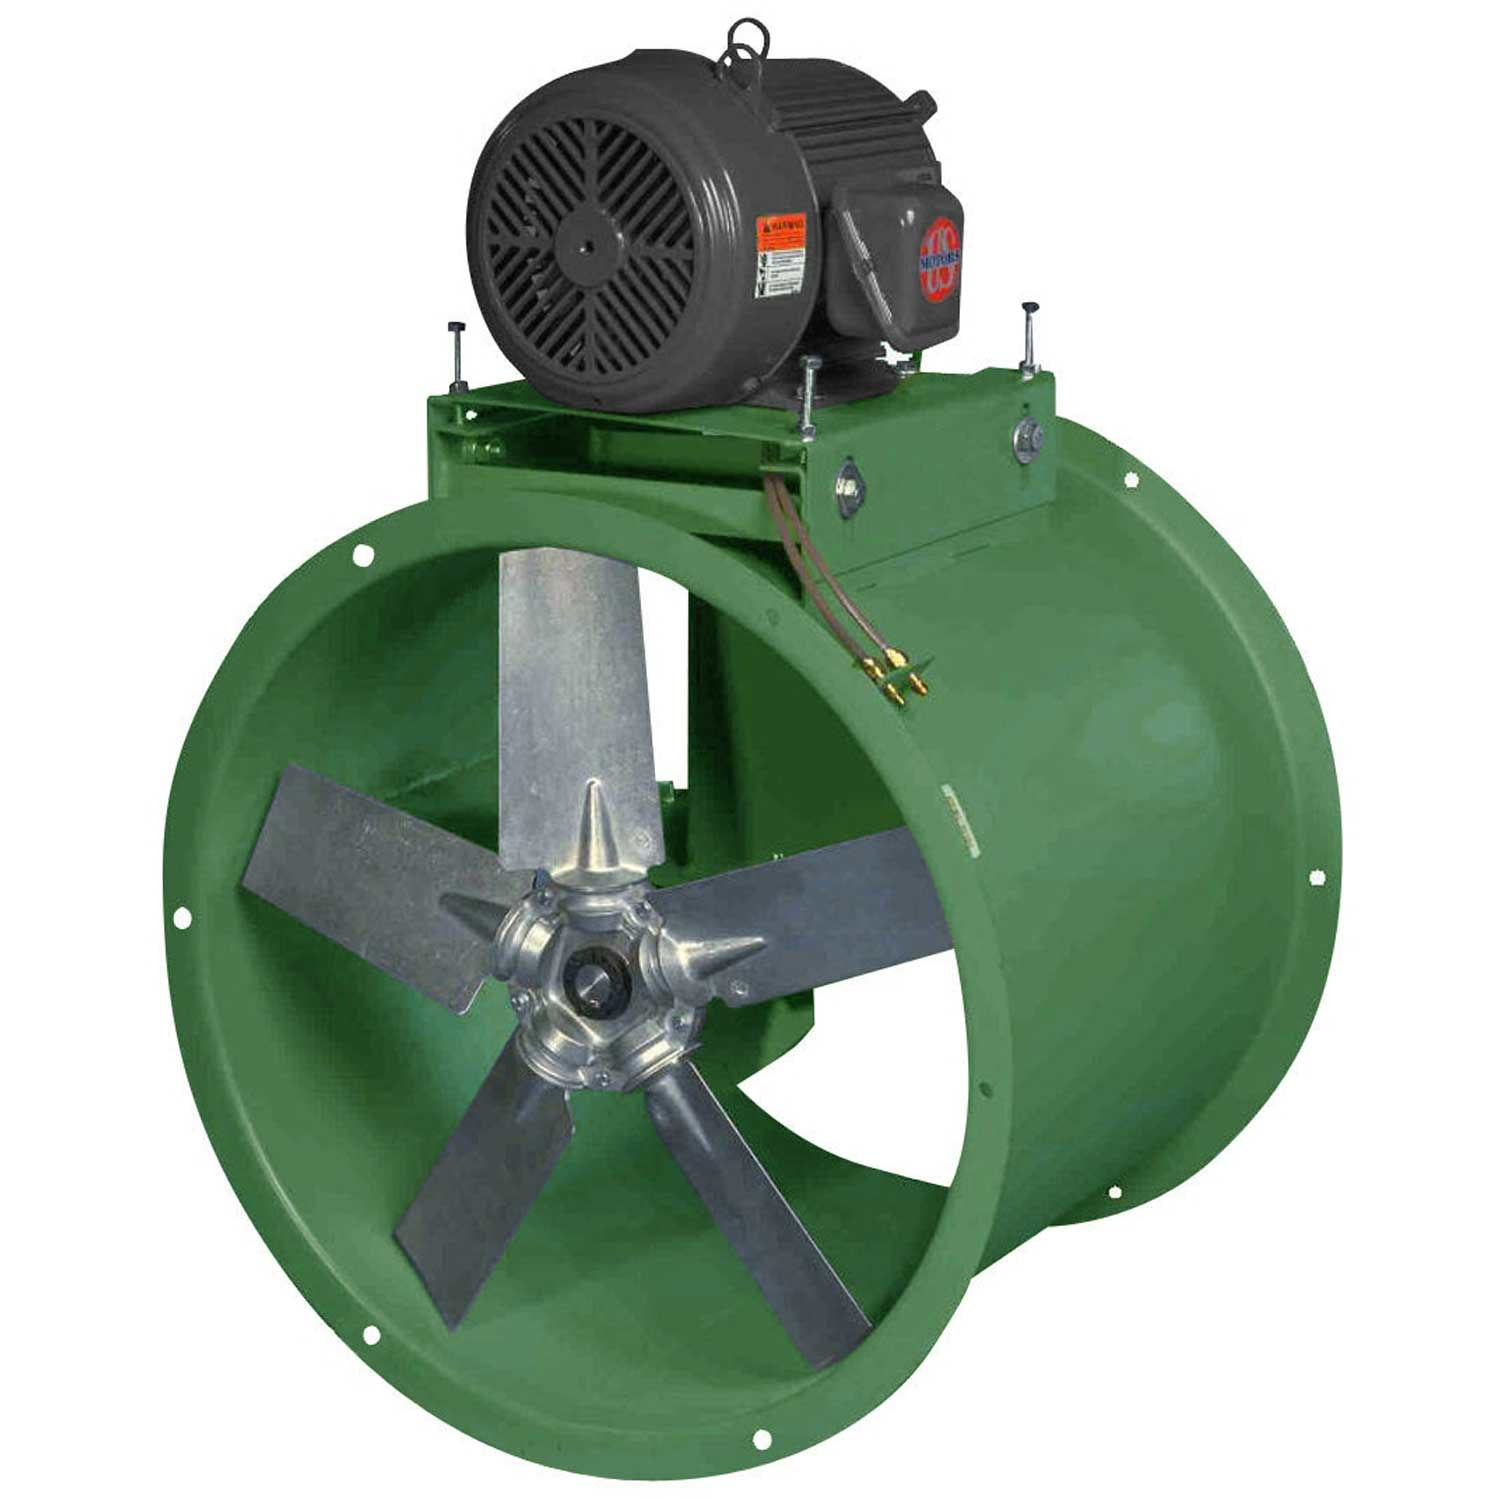 Canarm 30 Three Phase Belt Drive Tube Axial Duct Fan Bta30t30500m 5hp 18410 Cfm intended for proportions 1500 X 1500